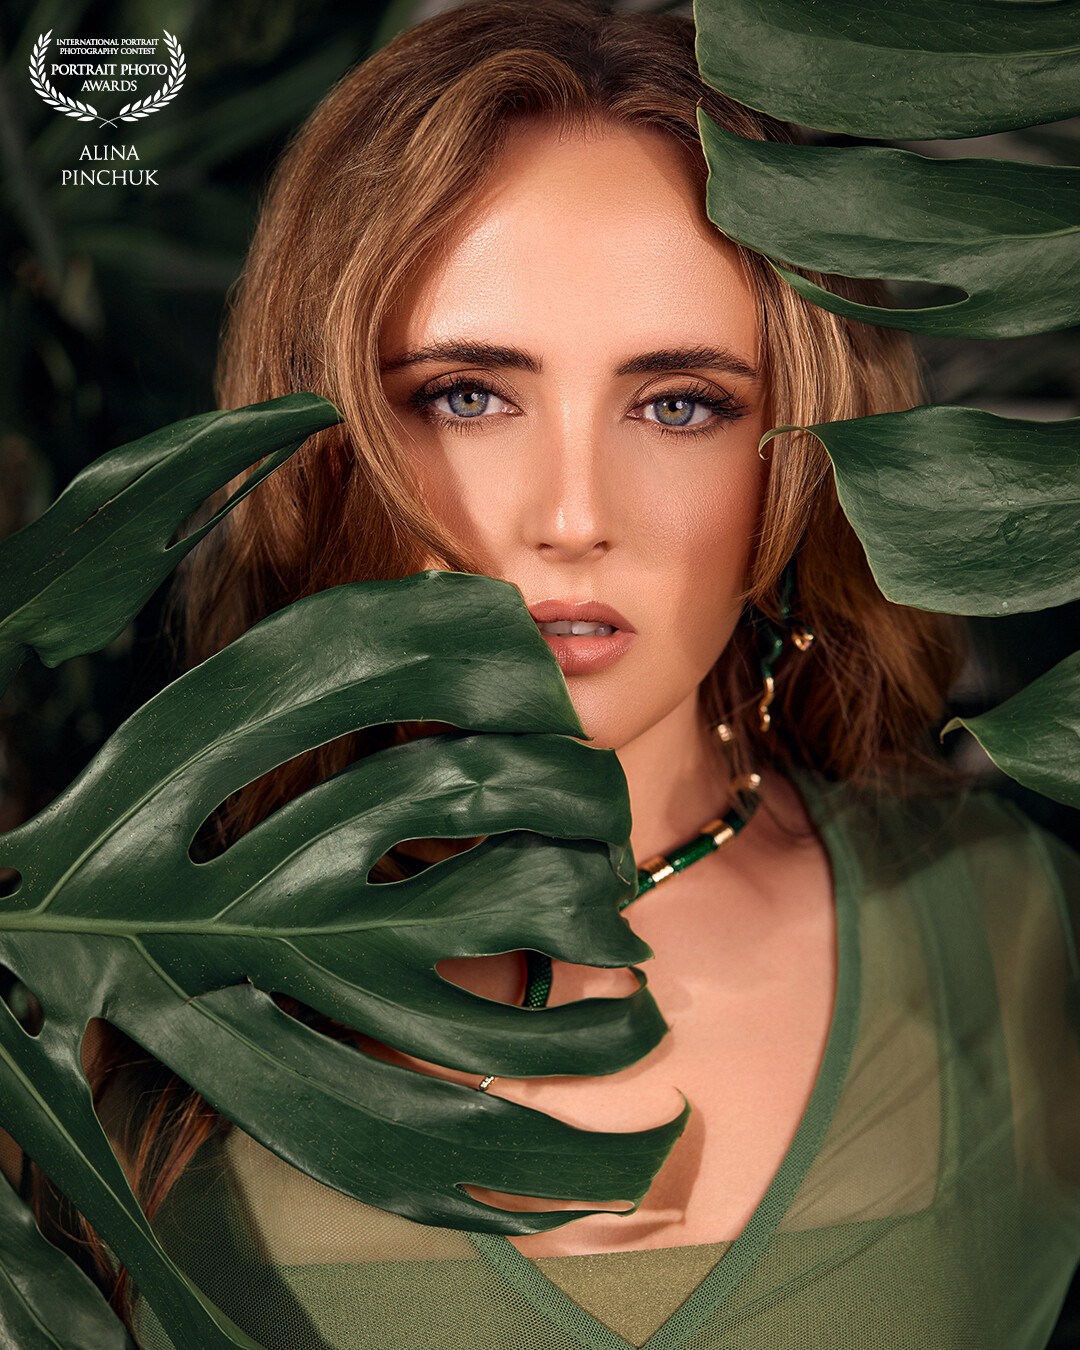 Model: Jessica Tataru @jessicatataru<br />
Creative Director & Photographer: Alina Pinchuk @armoniaphotography<br />
Makeup: @glammed.by.bella <br />
Hair: @olgakh_hair <br />
Parrots: @theparrotlady <br />
Florals: @fromthegroundupfloral